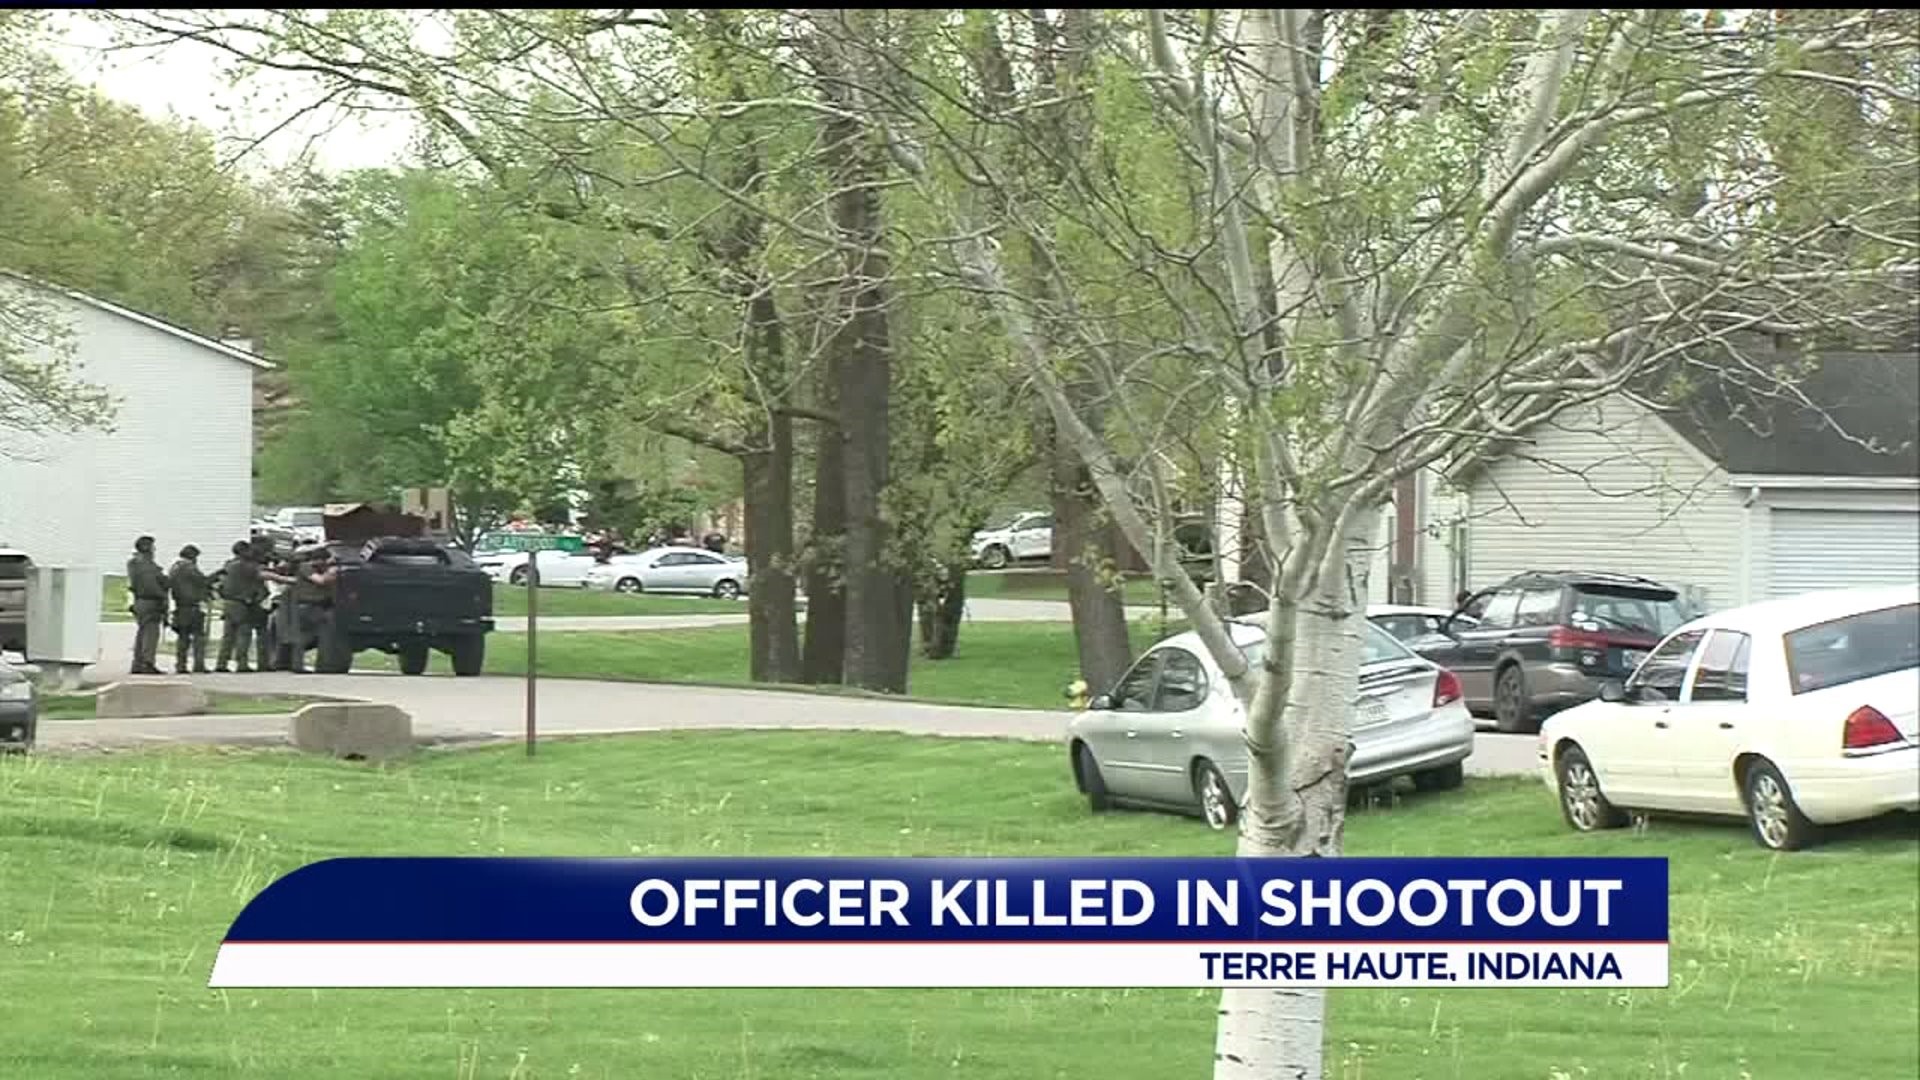 Officer killed in shootout